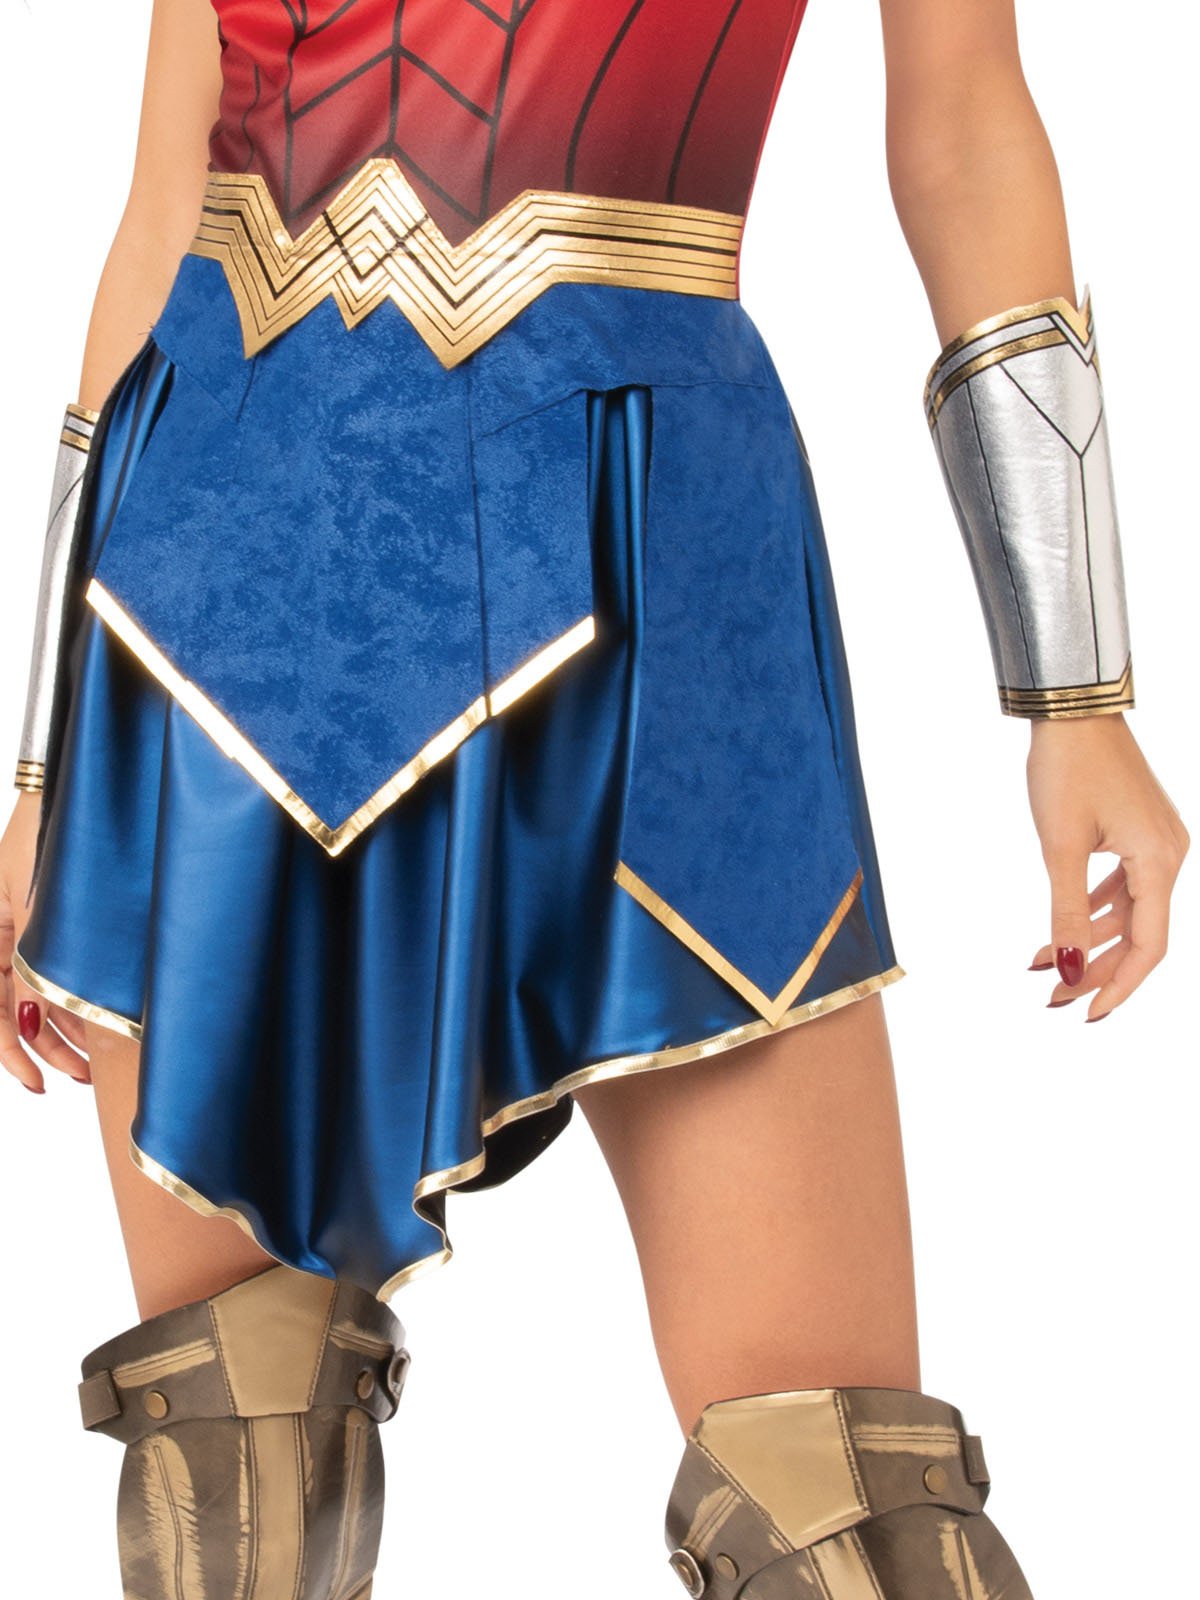 Costume Adult Wonder Woman 1984 Deluxe Large